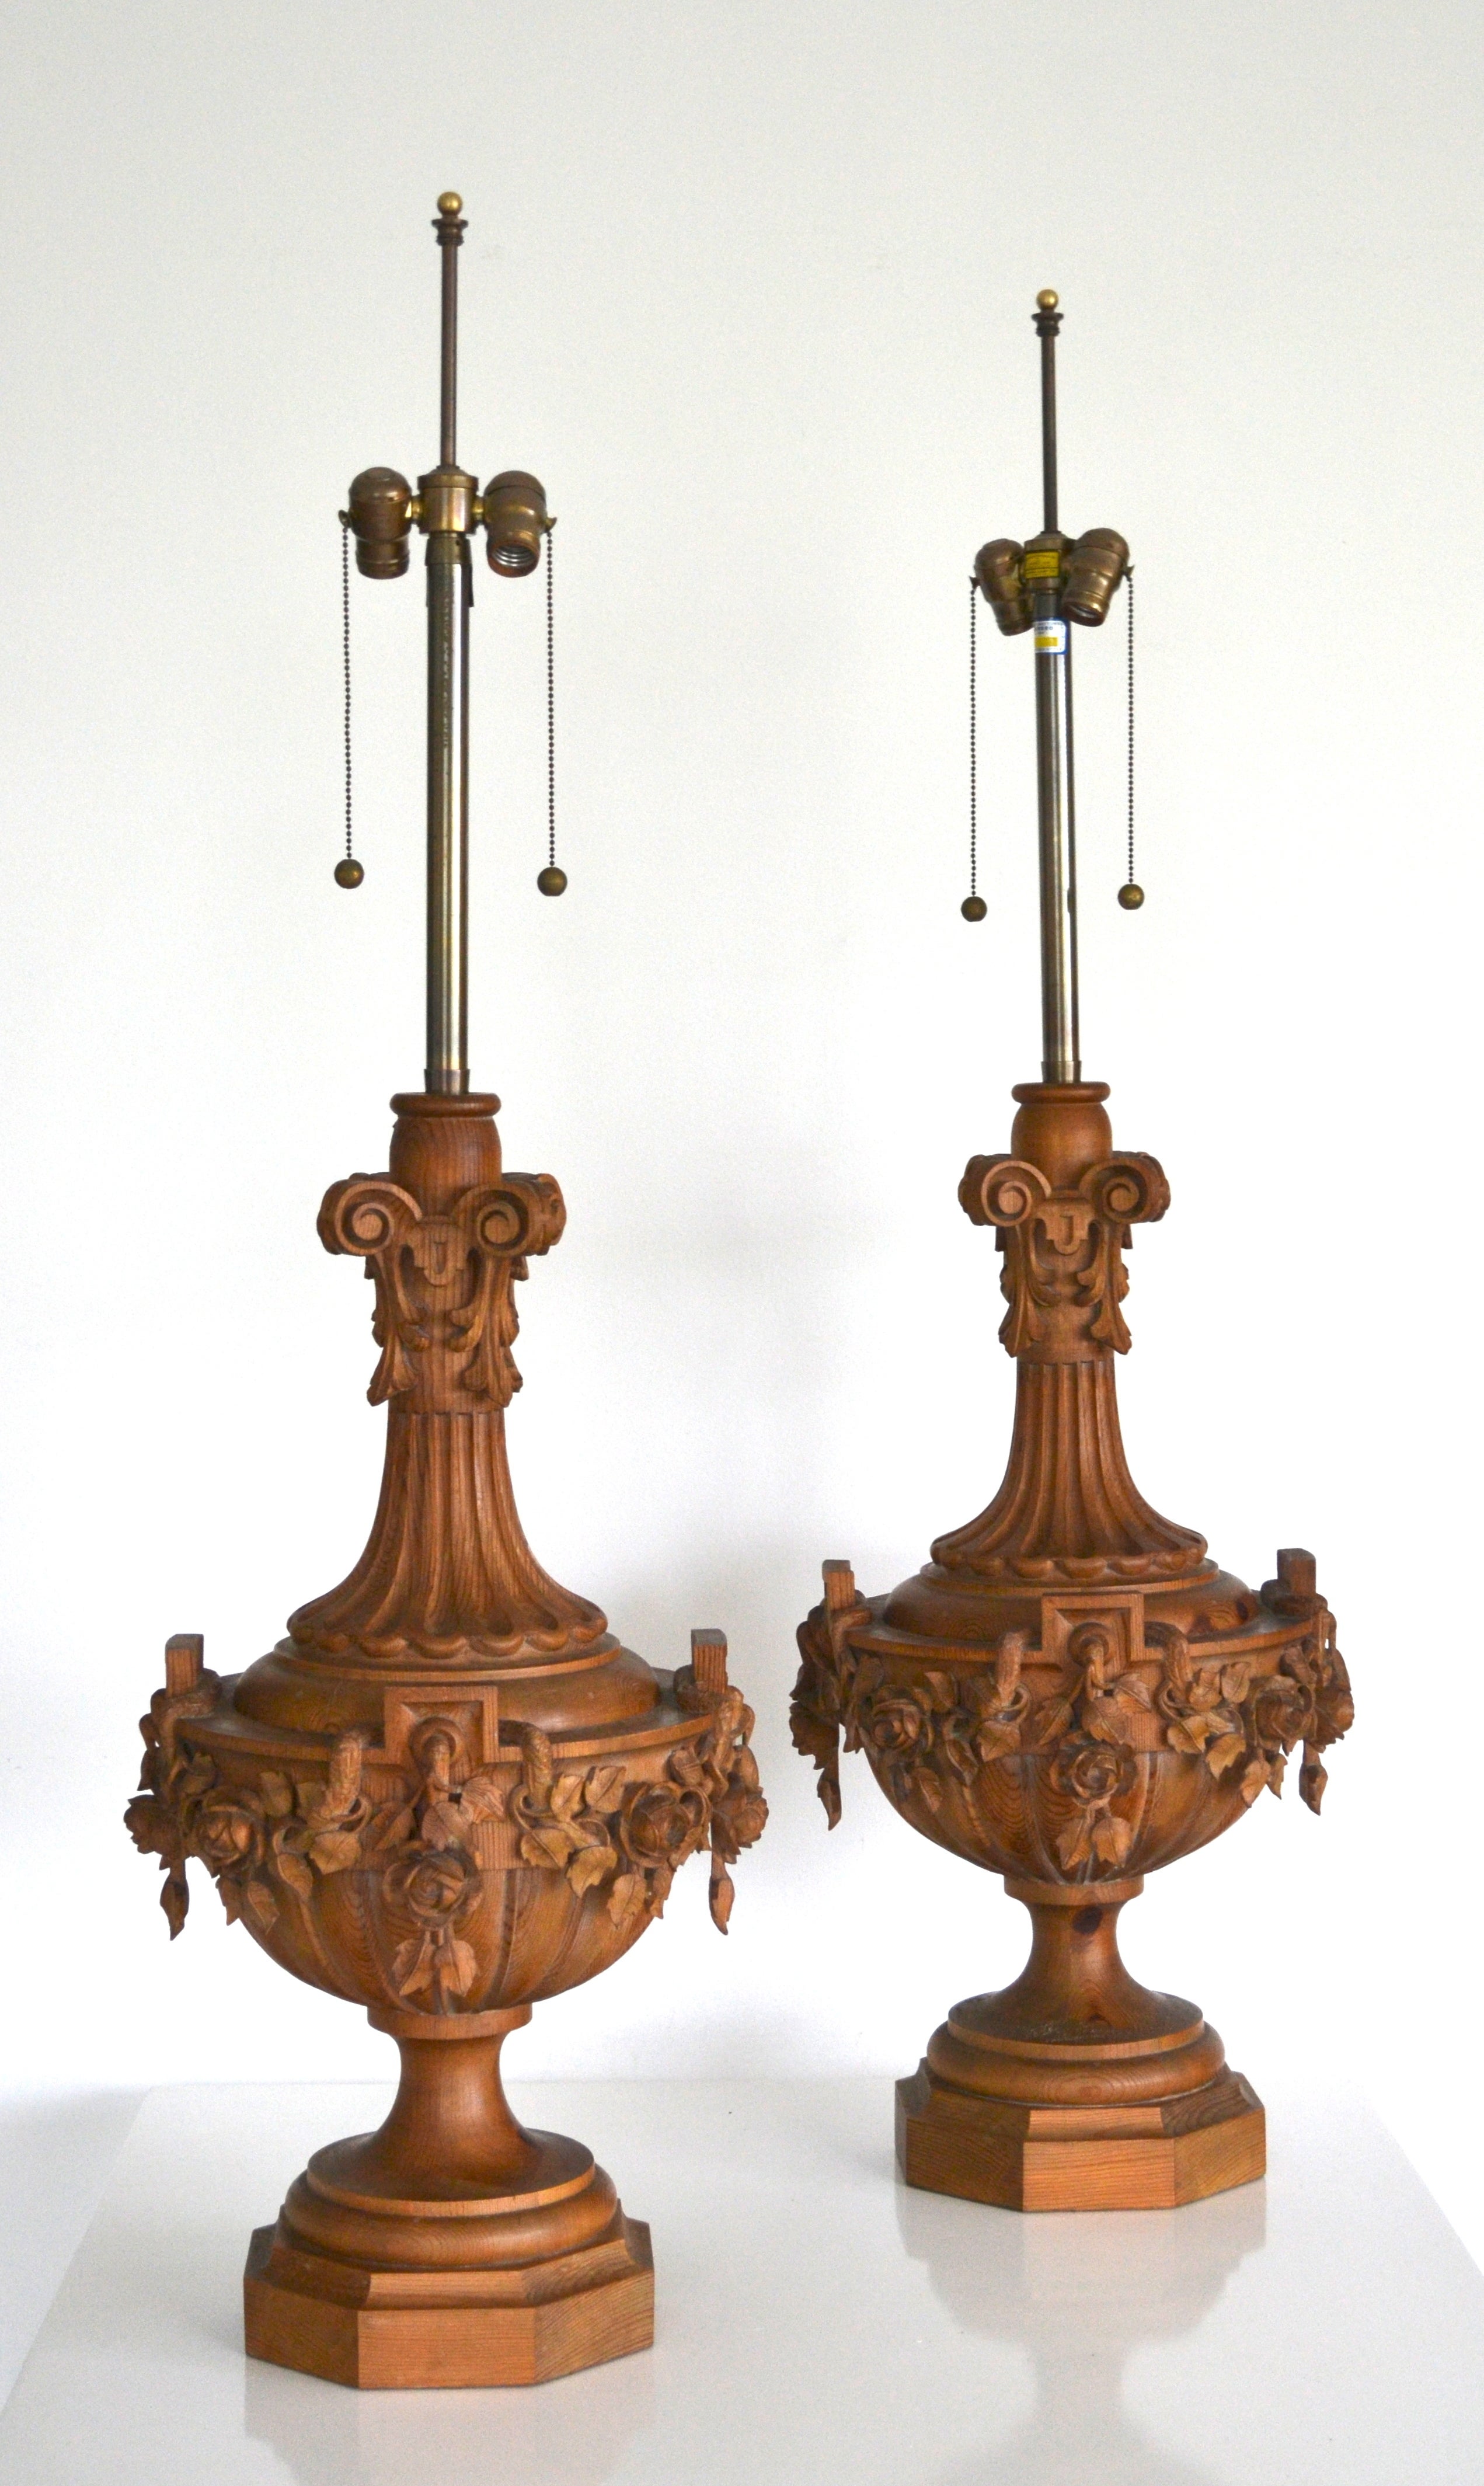 Pair of Impressive Hollywood Regency Wooden Urn Form Table Lamps by Marbro